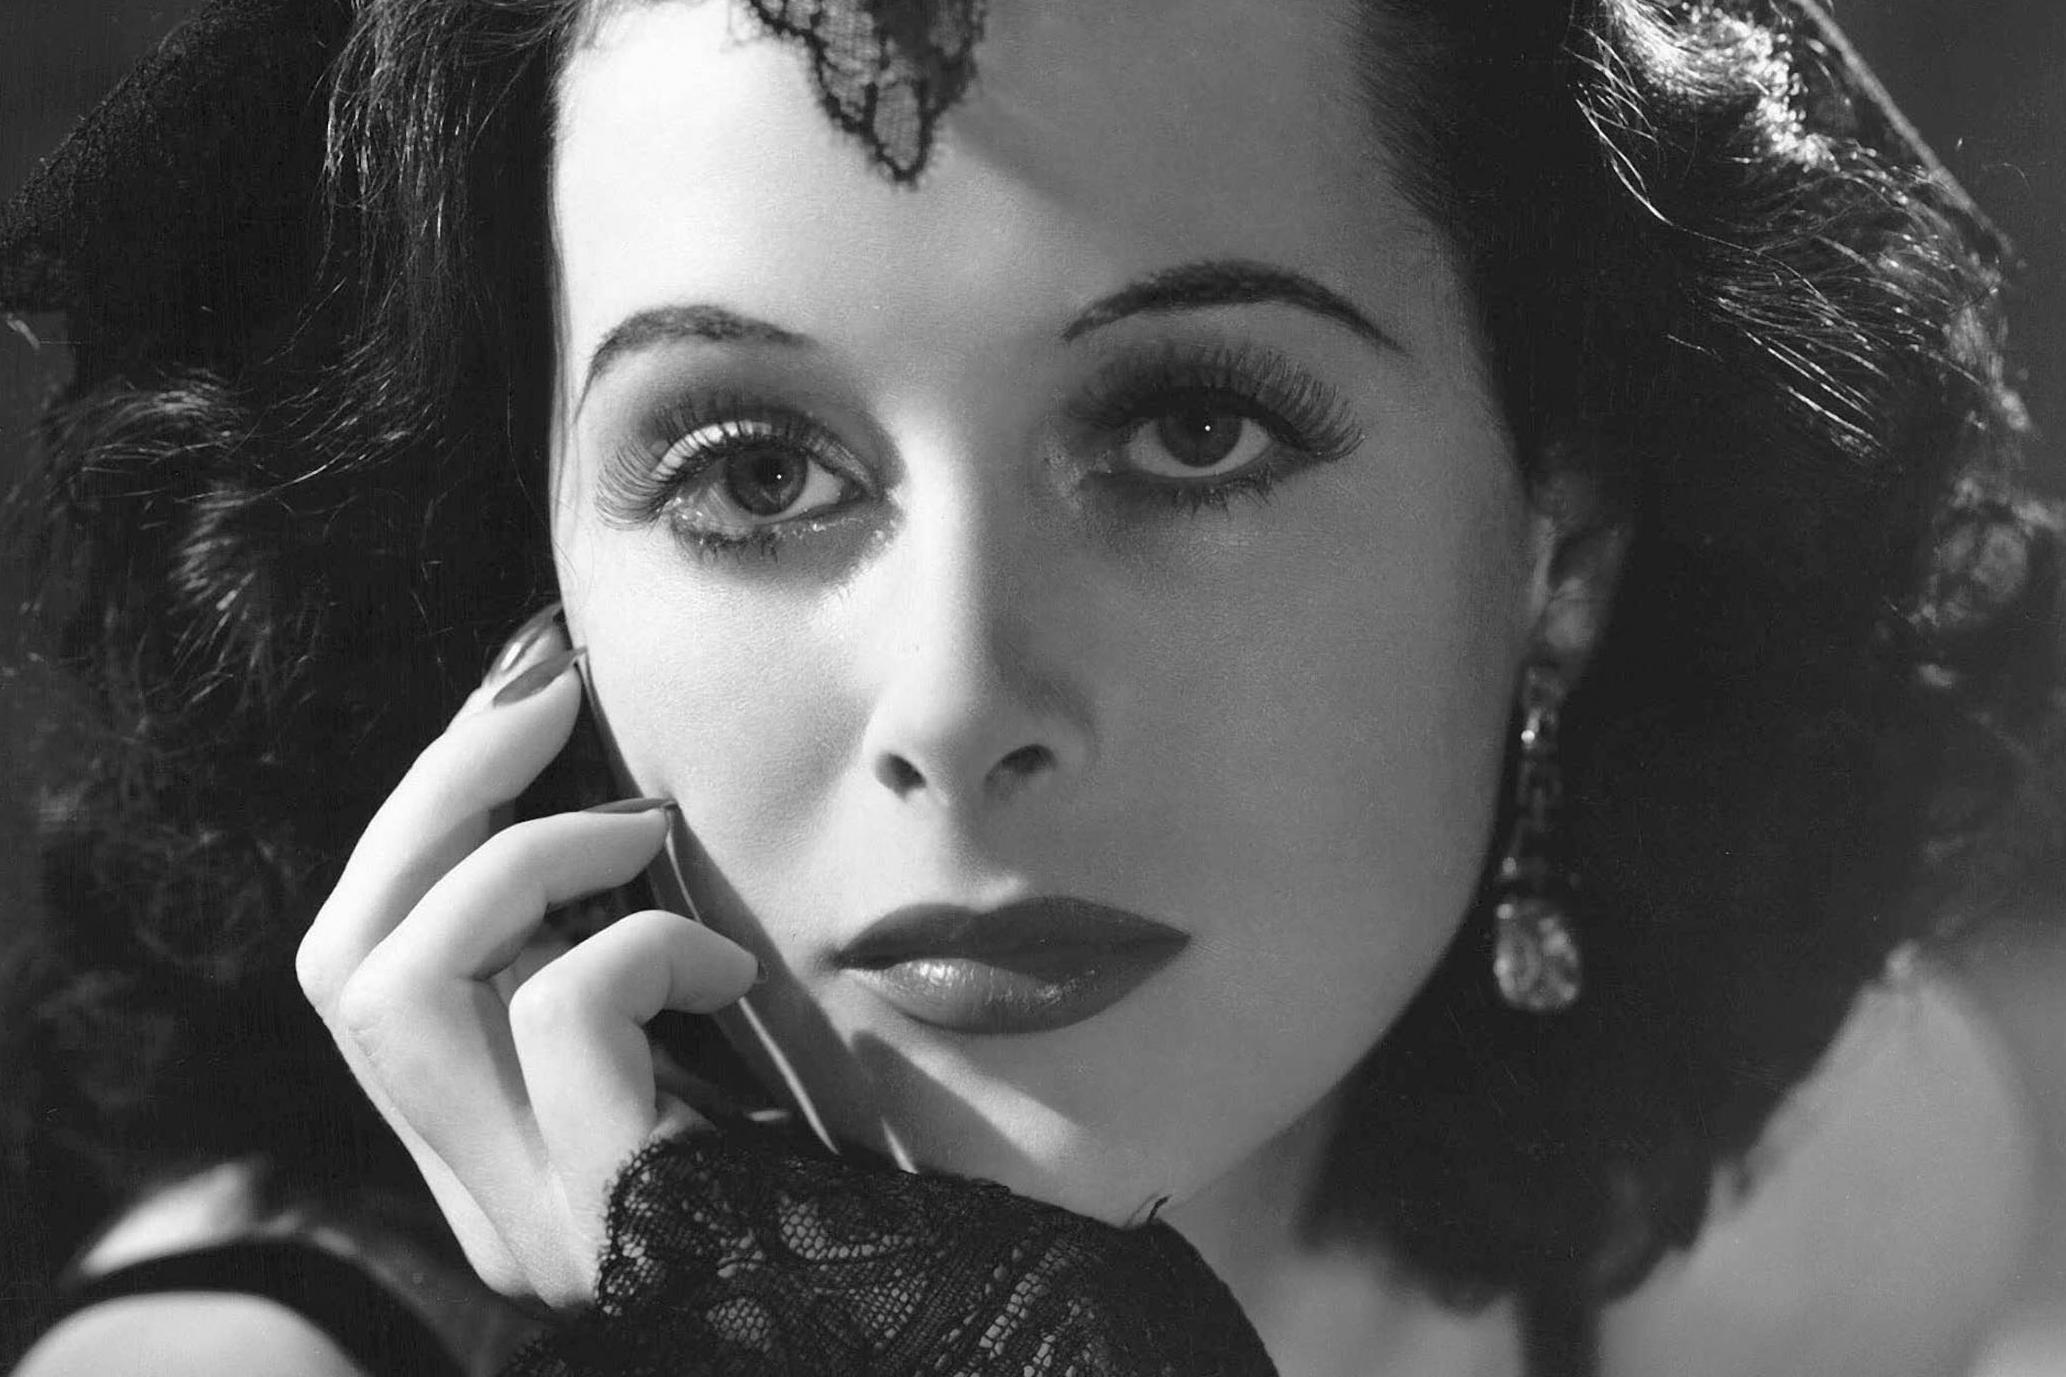 Hedy Lamarr: The Hollywood bombshell whose genius the world tried to ignore